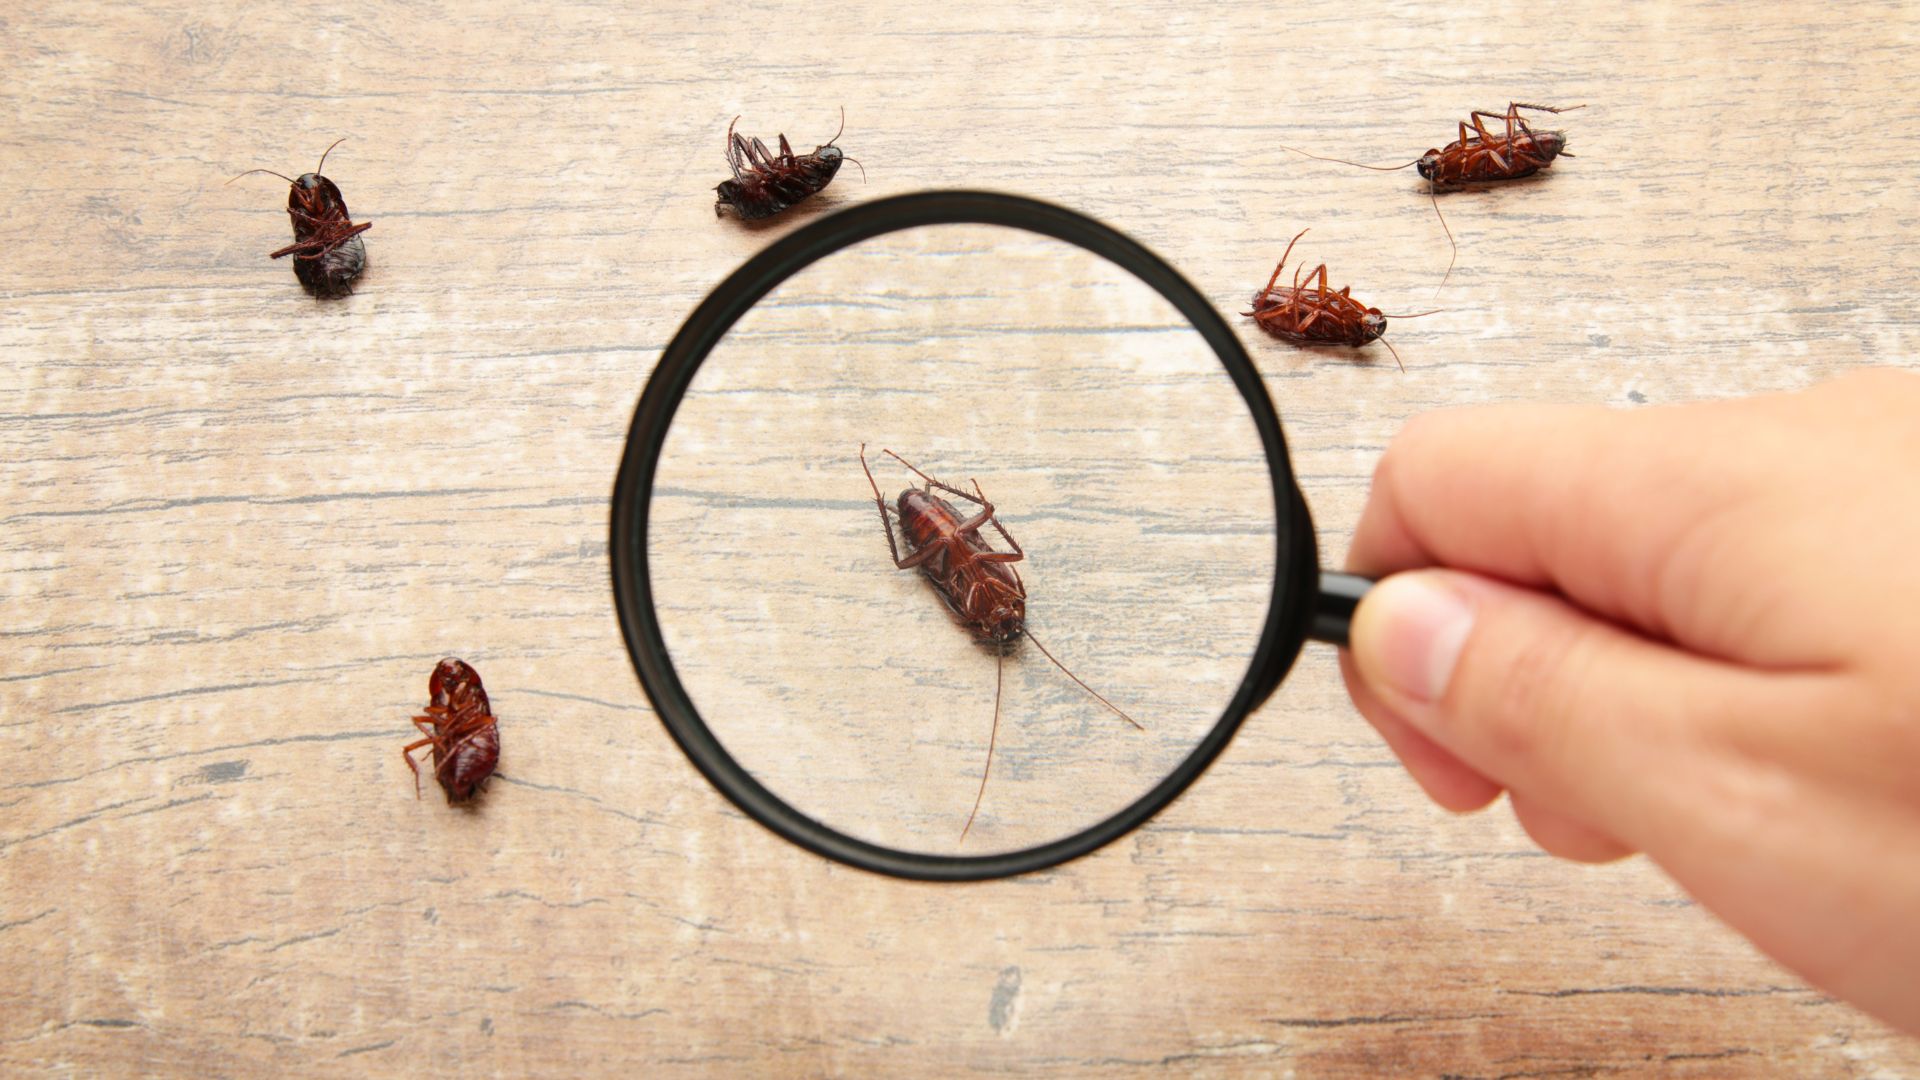 Cockroach-Pest-Control-in-pune